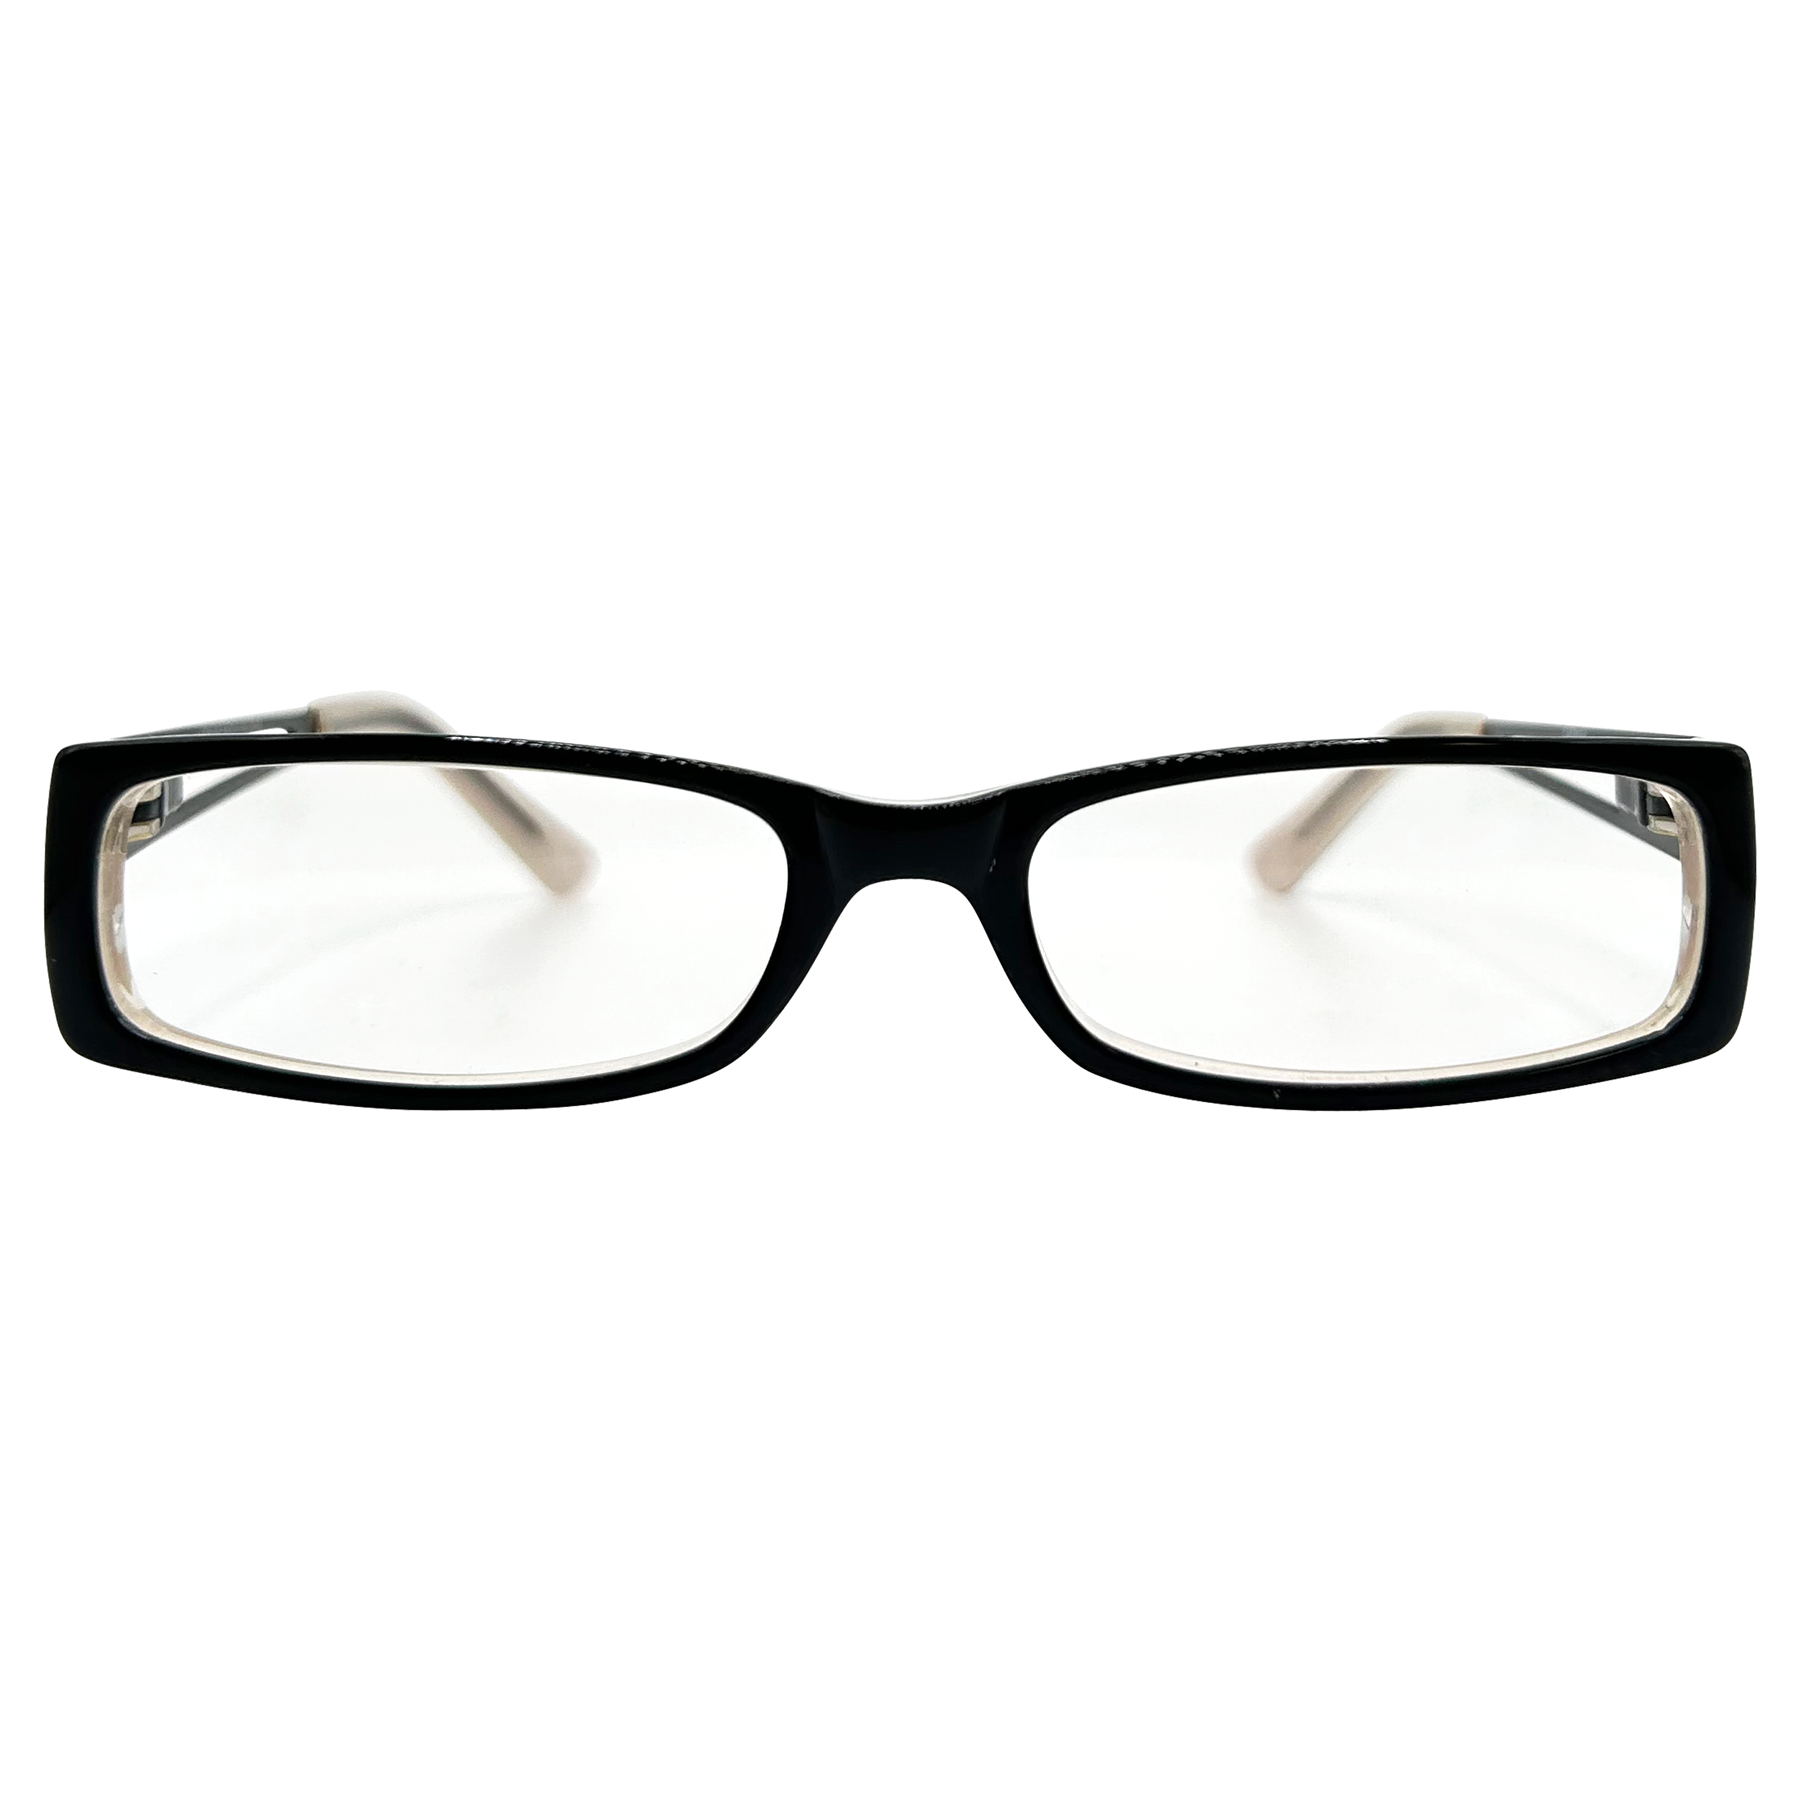 2 TONE Small Clear Rectangular 90s Glasses